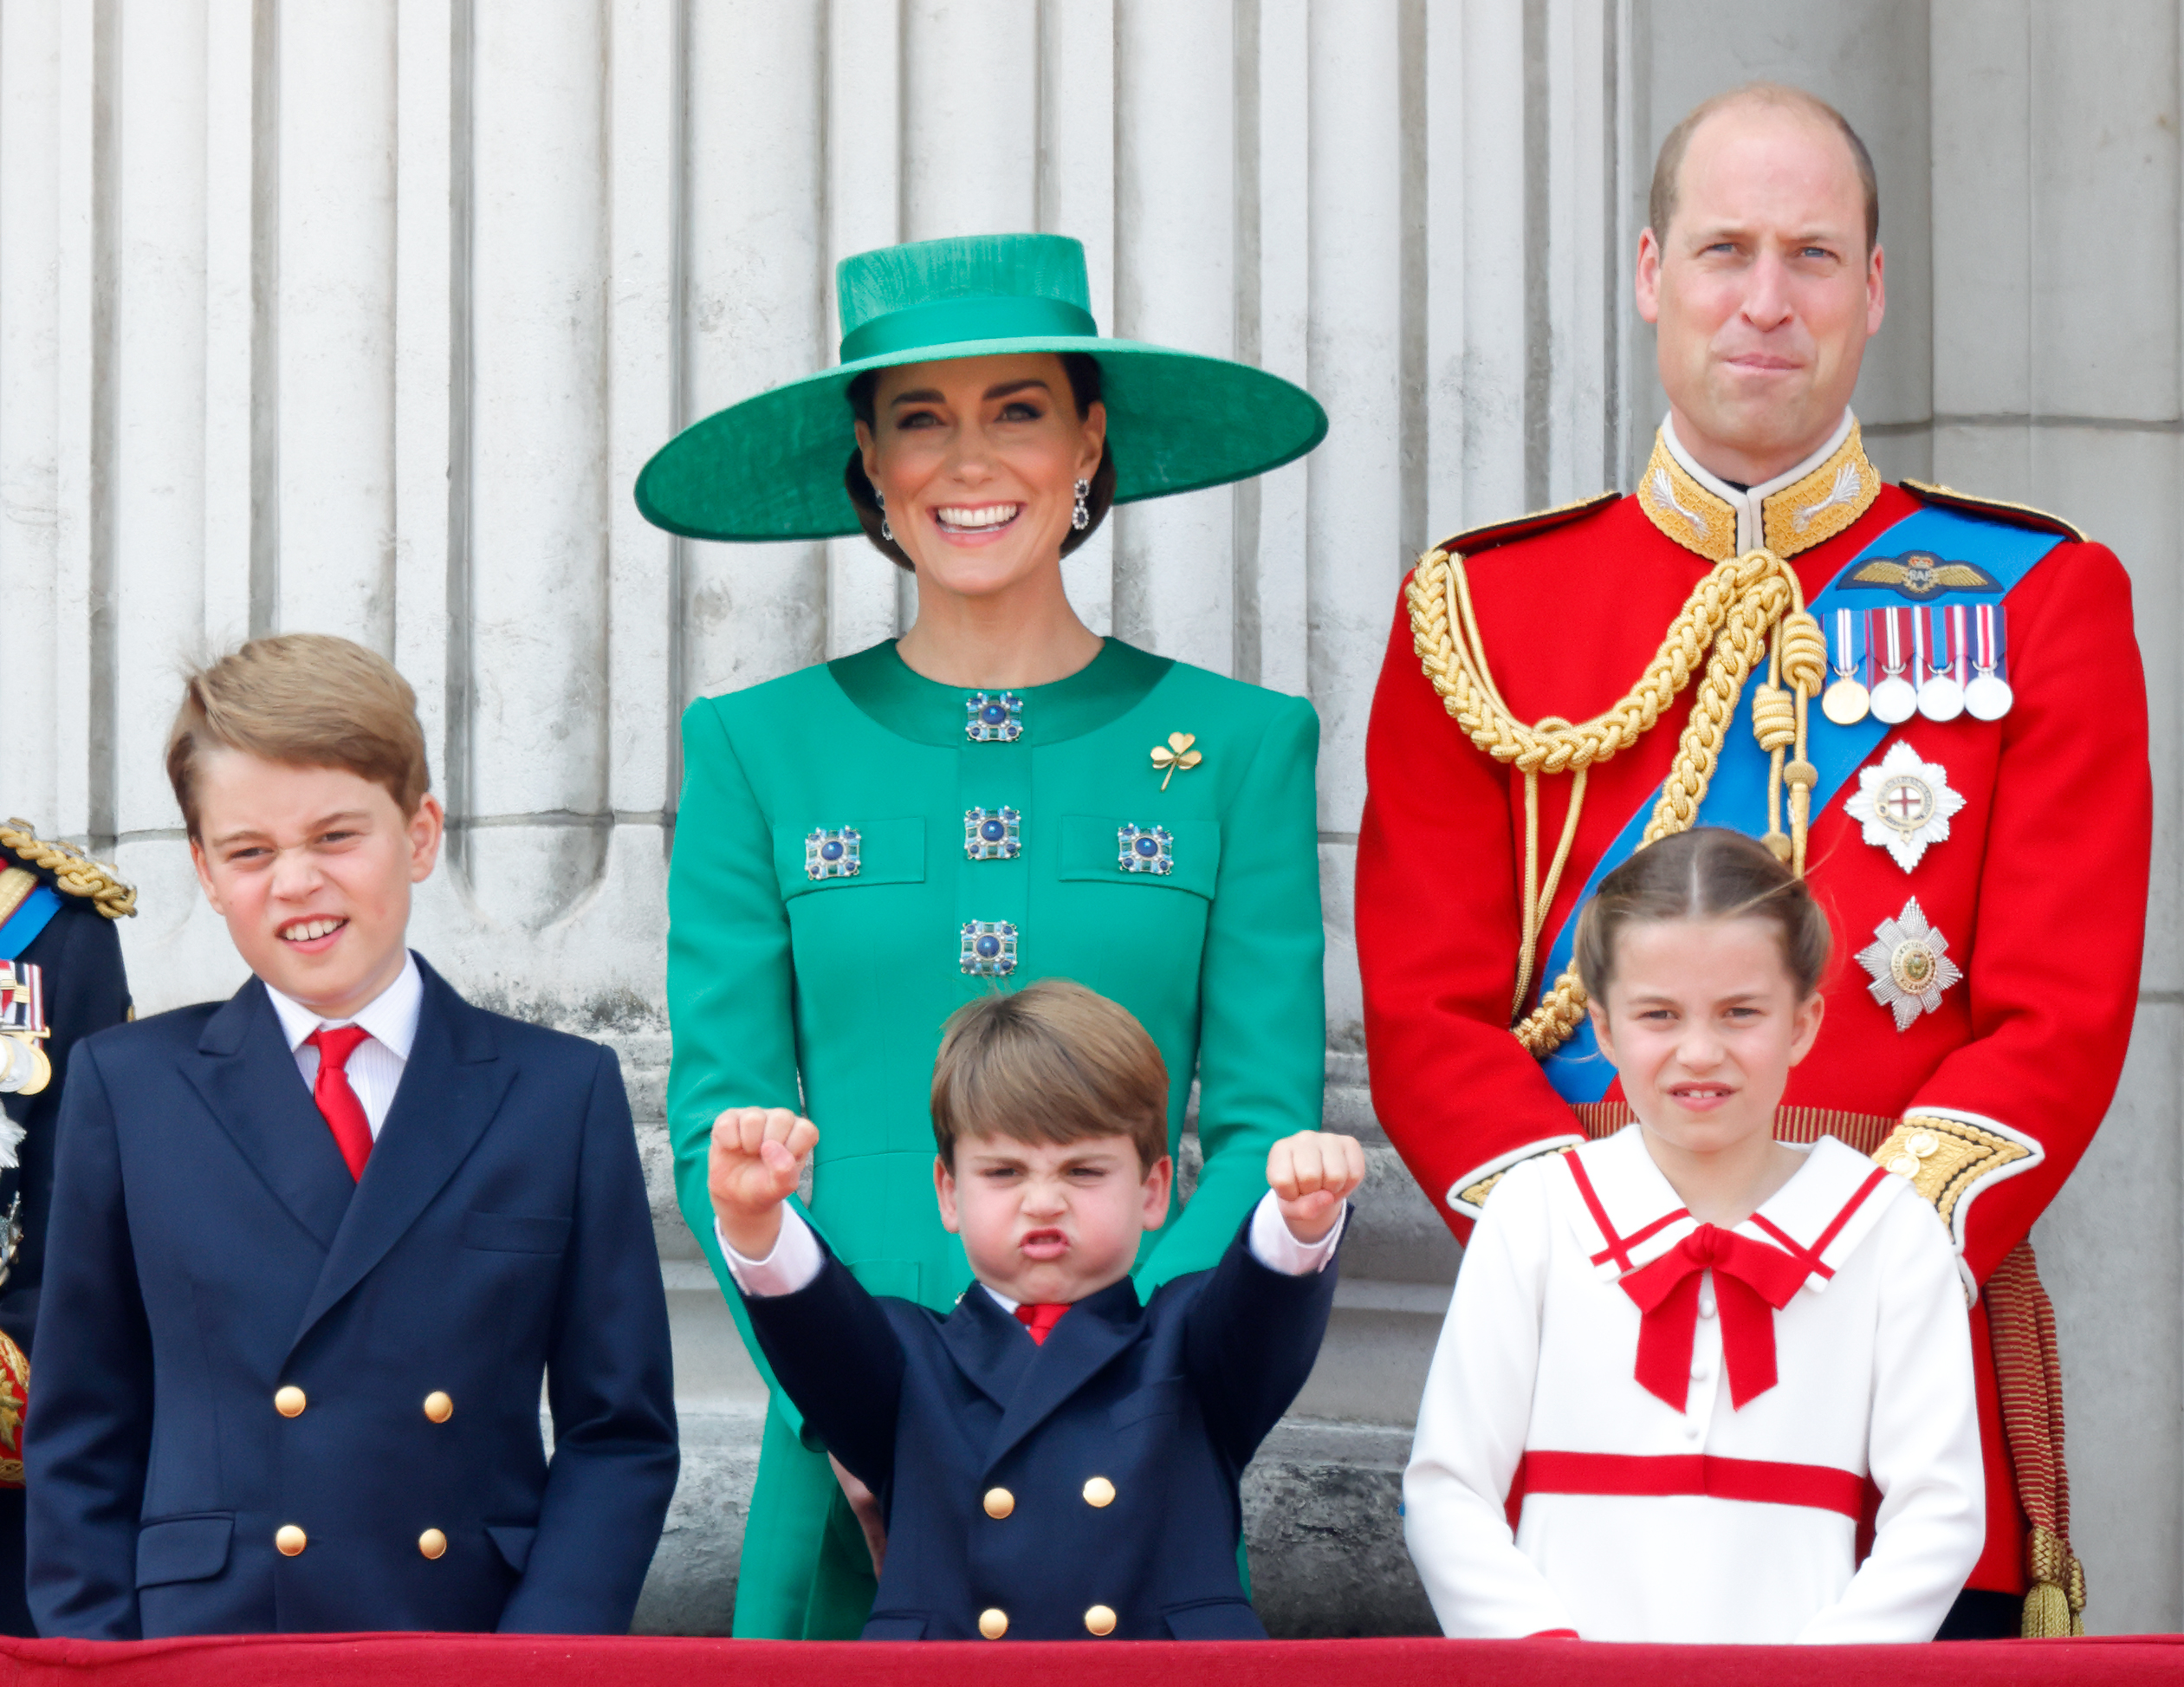 Prince George of Wales, Prince Louis of Wales, Catherine, Princess of Wales (Colonel of the Irish Guards), Princess Charlotte of Wales and Prince William